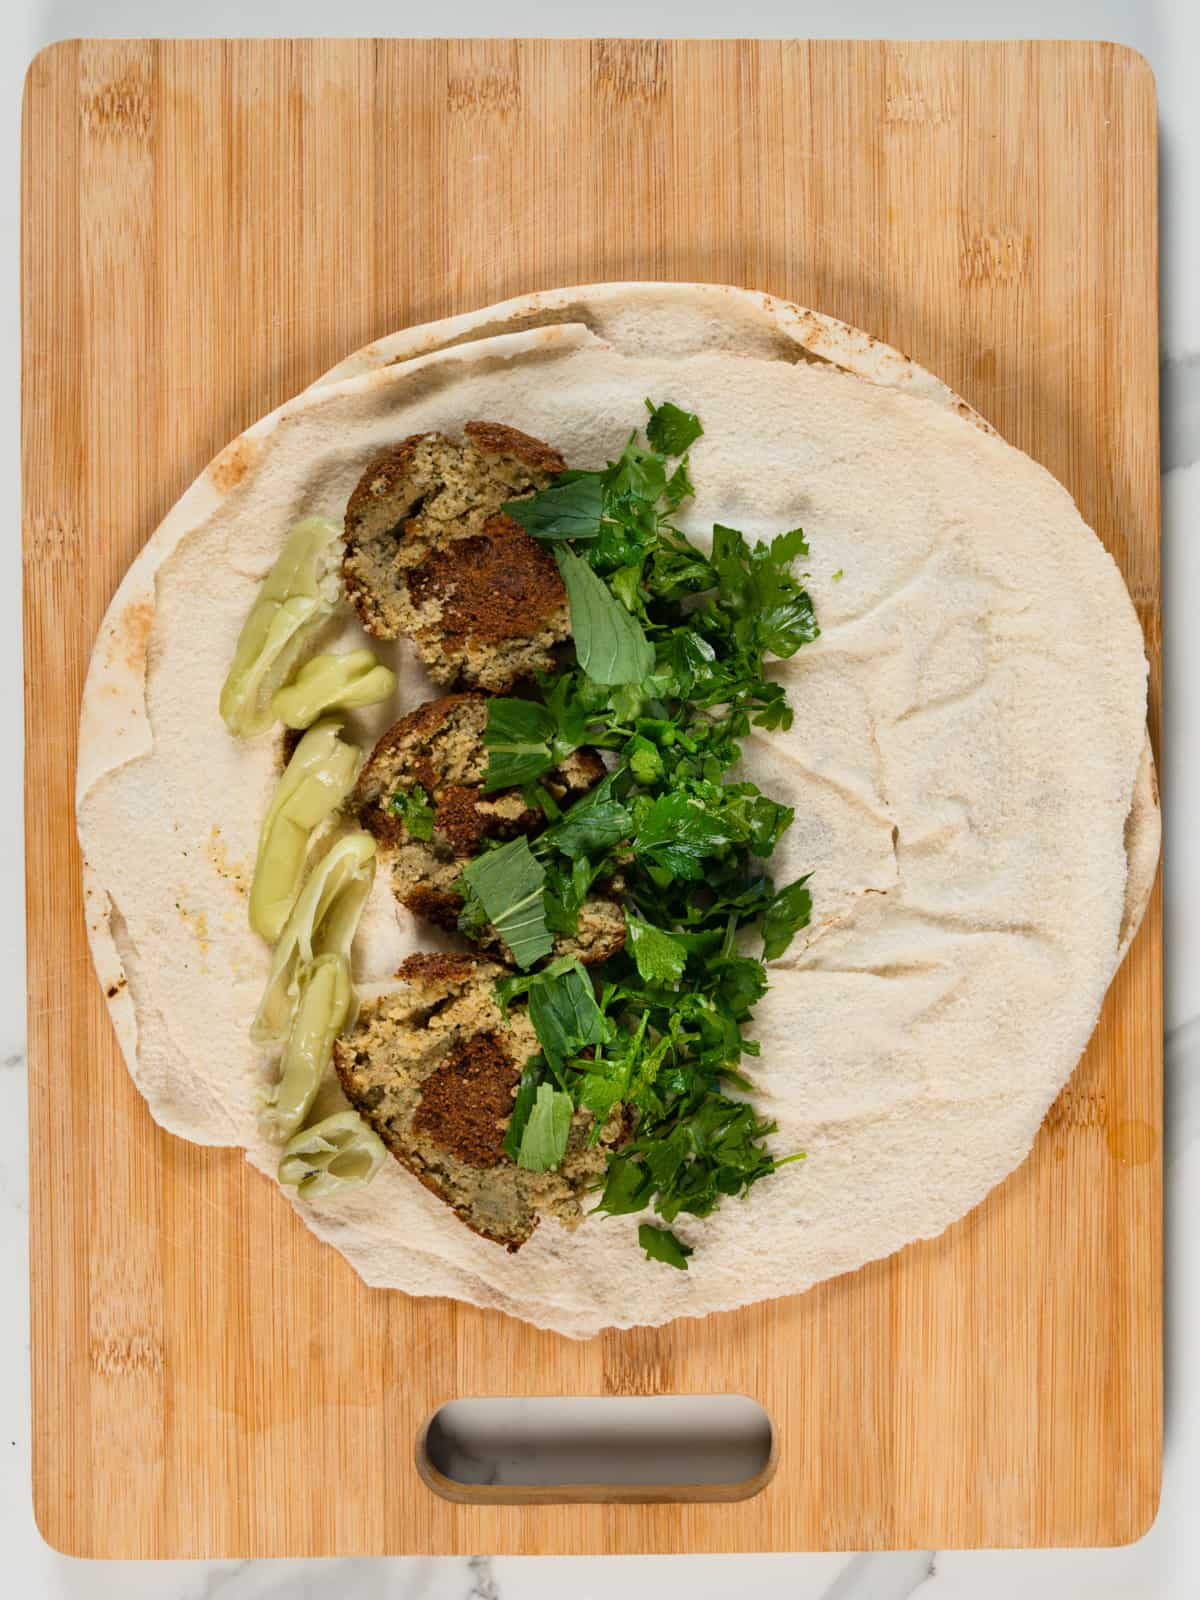 mint and parsley leaves with green pickled chillis in a round pita bread with squashed falafel